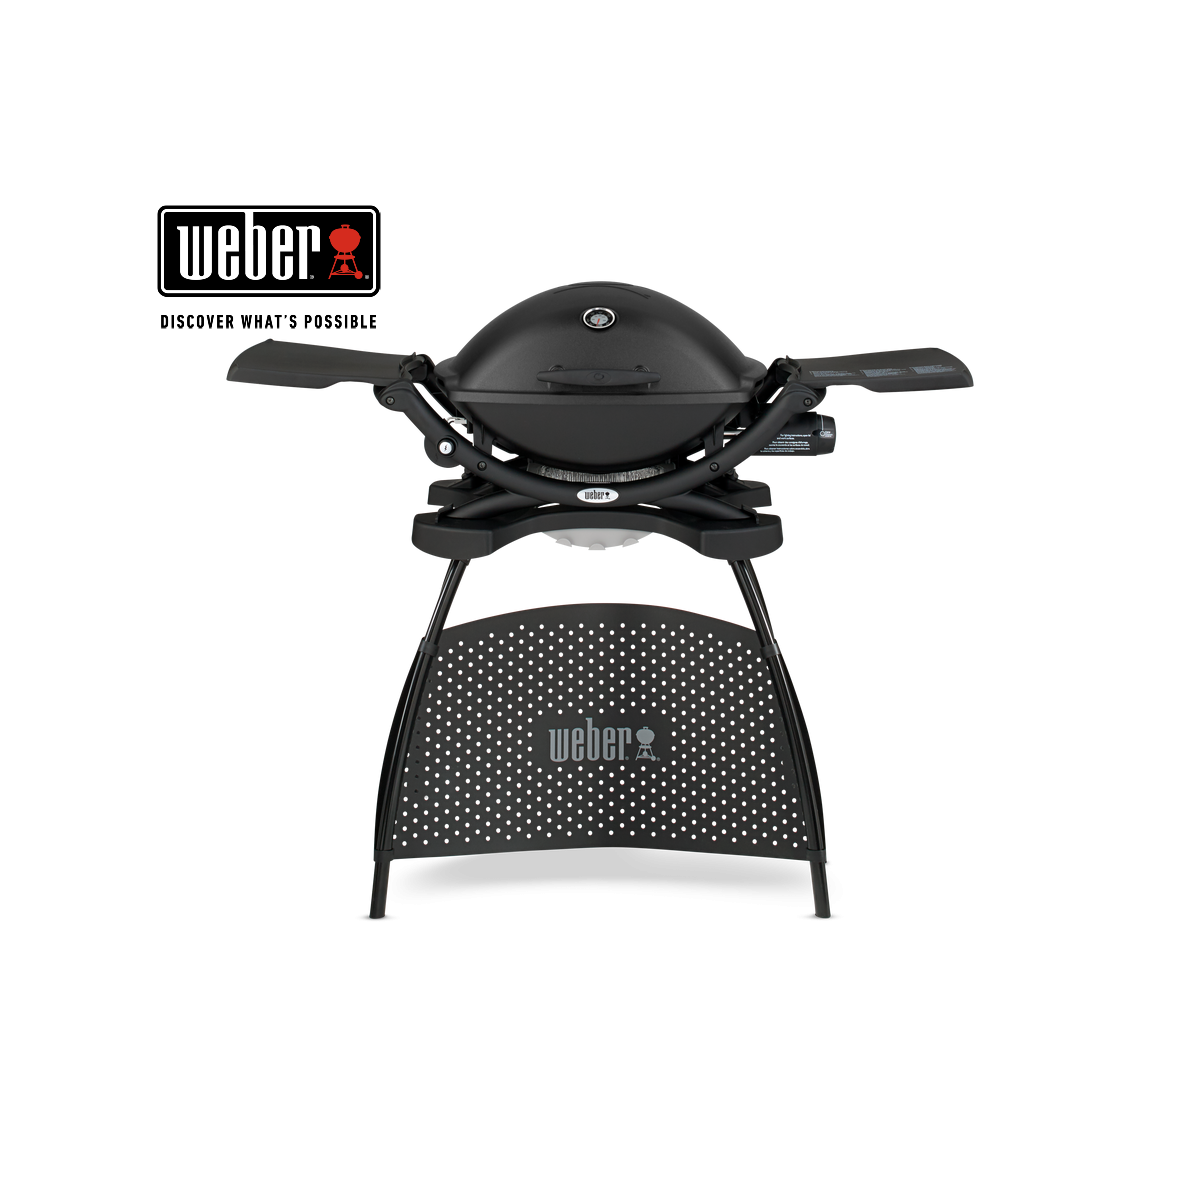 WEBER Q2200 gas grill with cart, 54010369